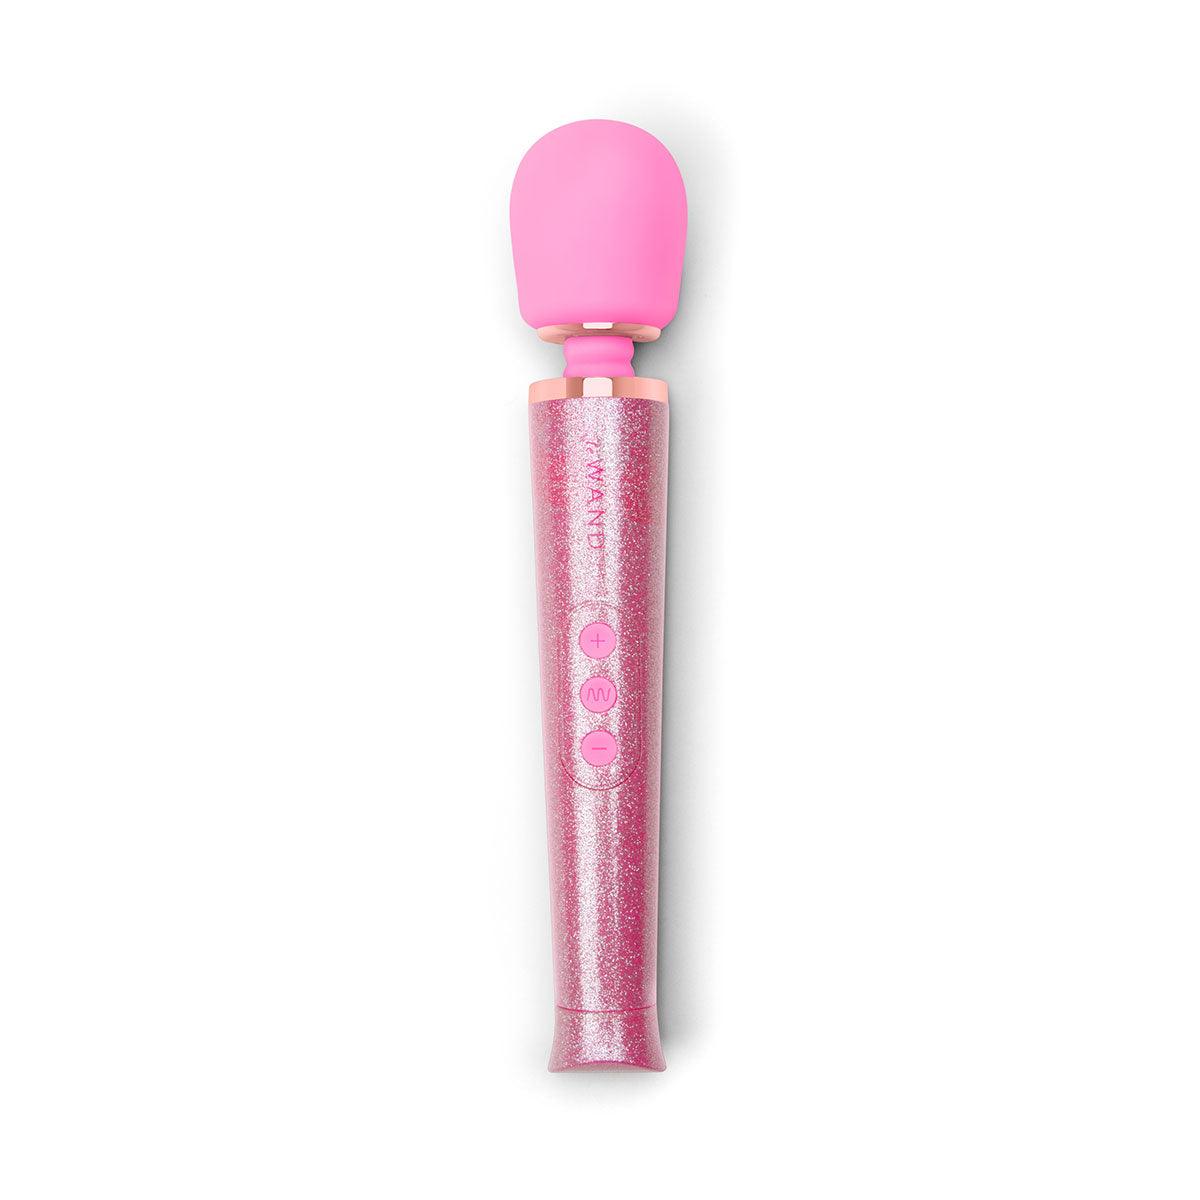 Le Wand - All that Glimmers Pink - shop enby